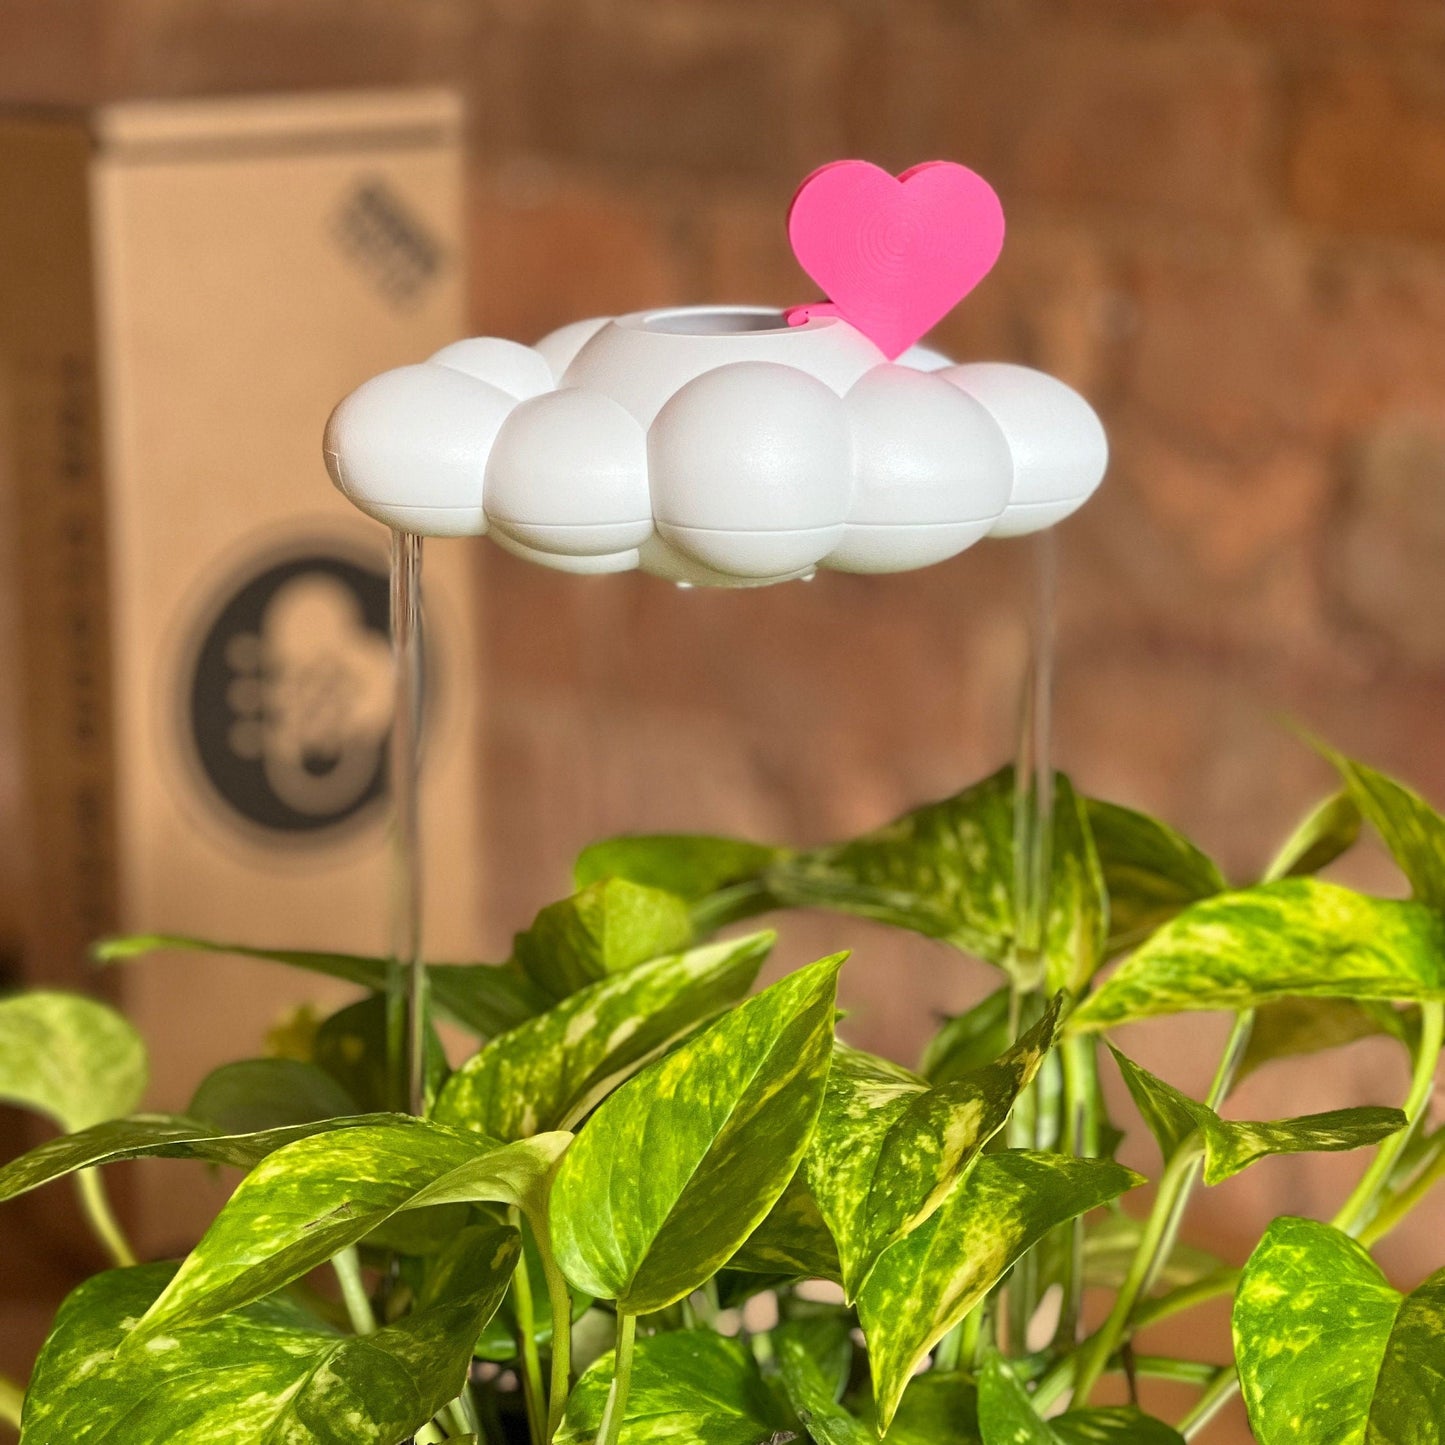 Original Dripping Rain Cloud by THE CLOUD MAKERS with Pink Heart Charm